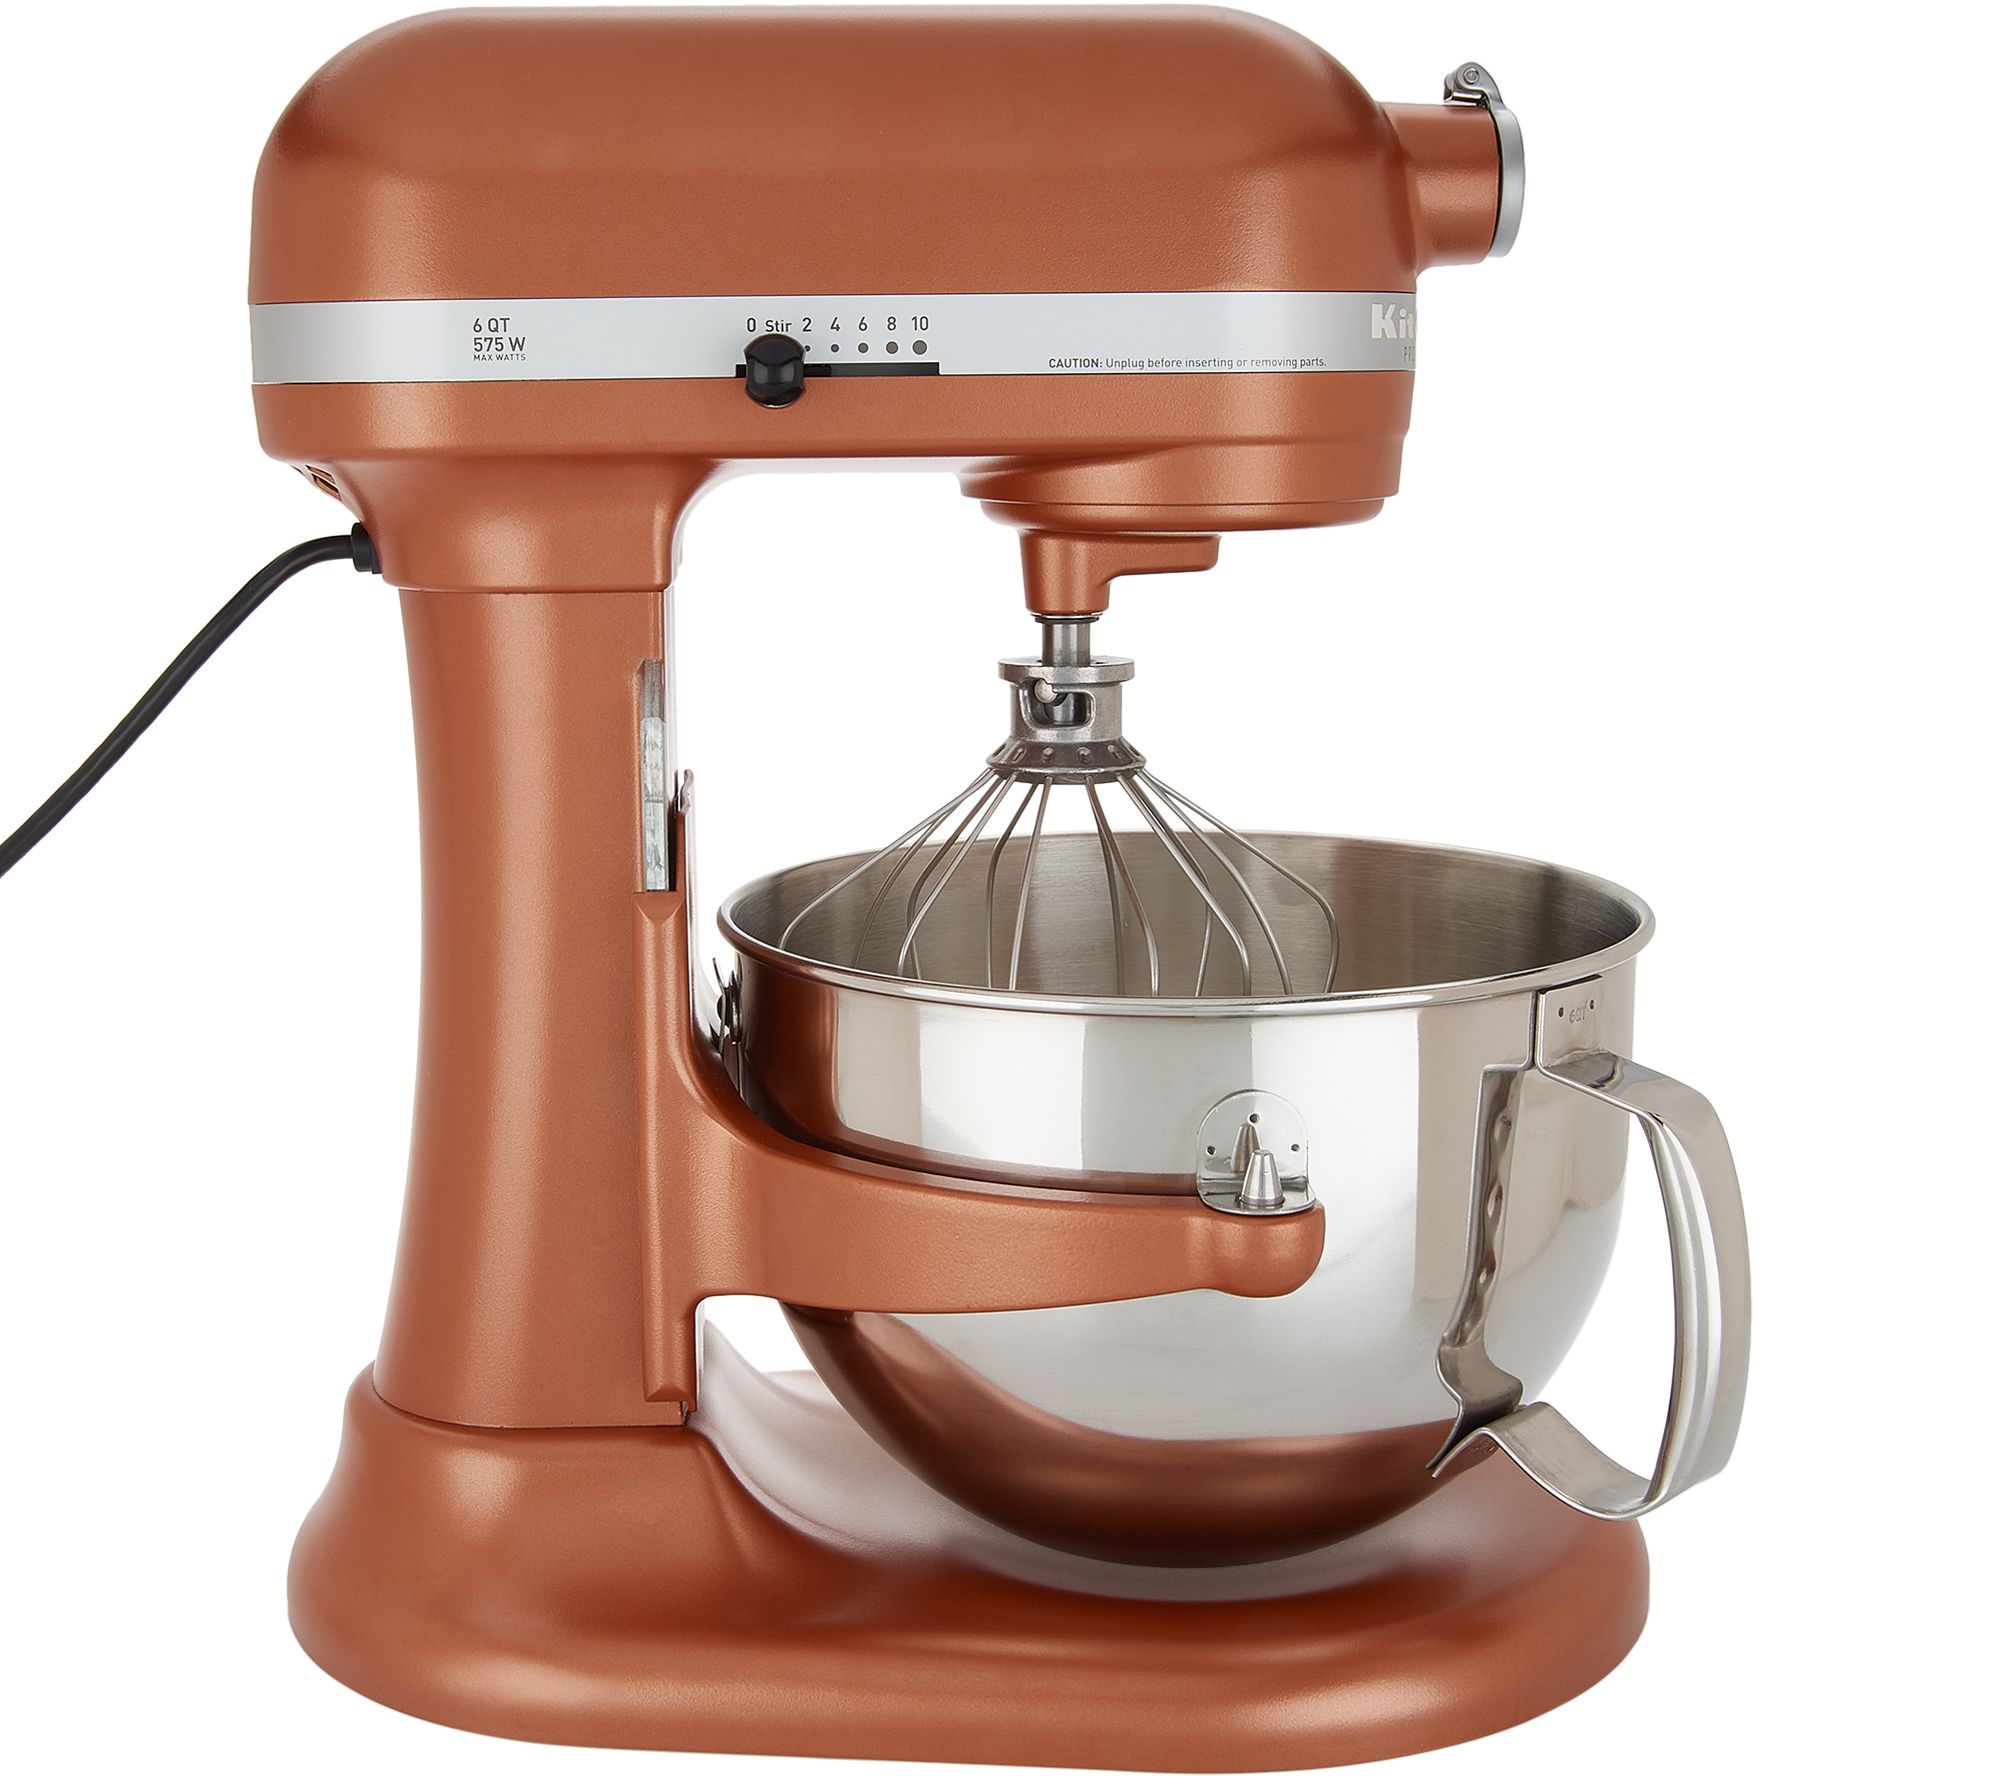 QVC has the iconic KitchenAid mixer for the lowest price on the web